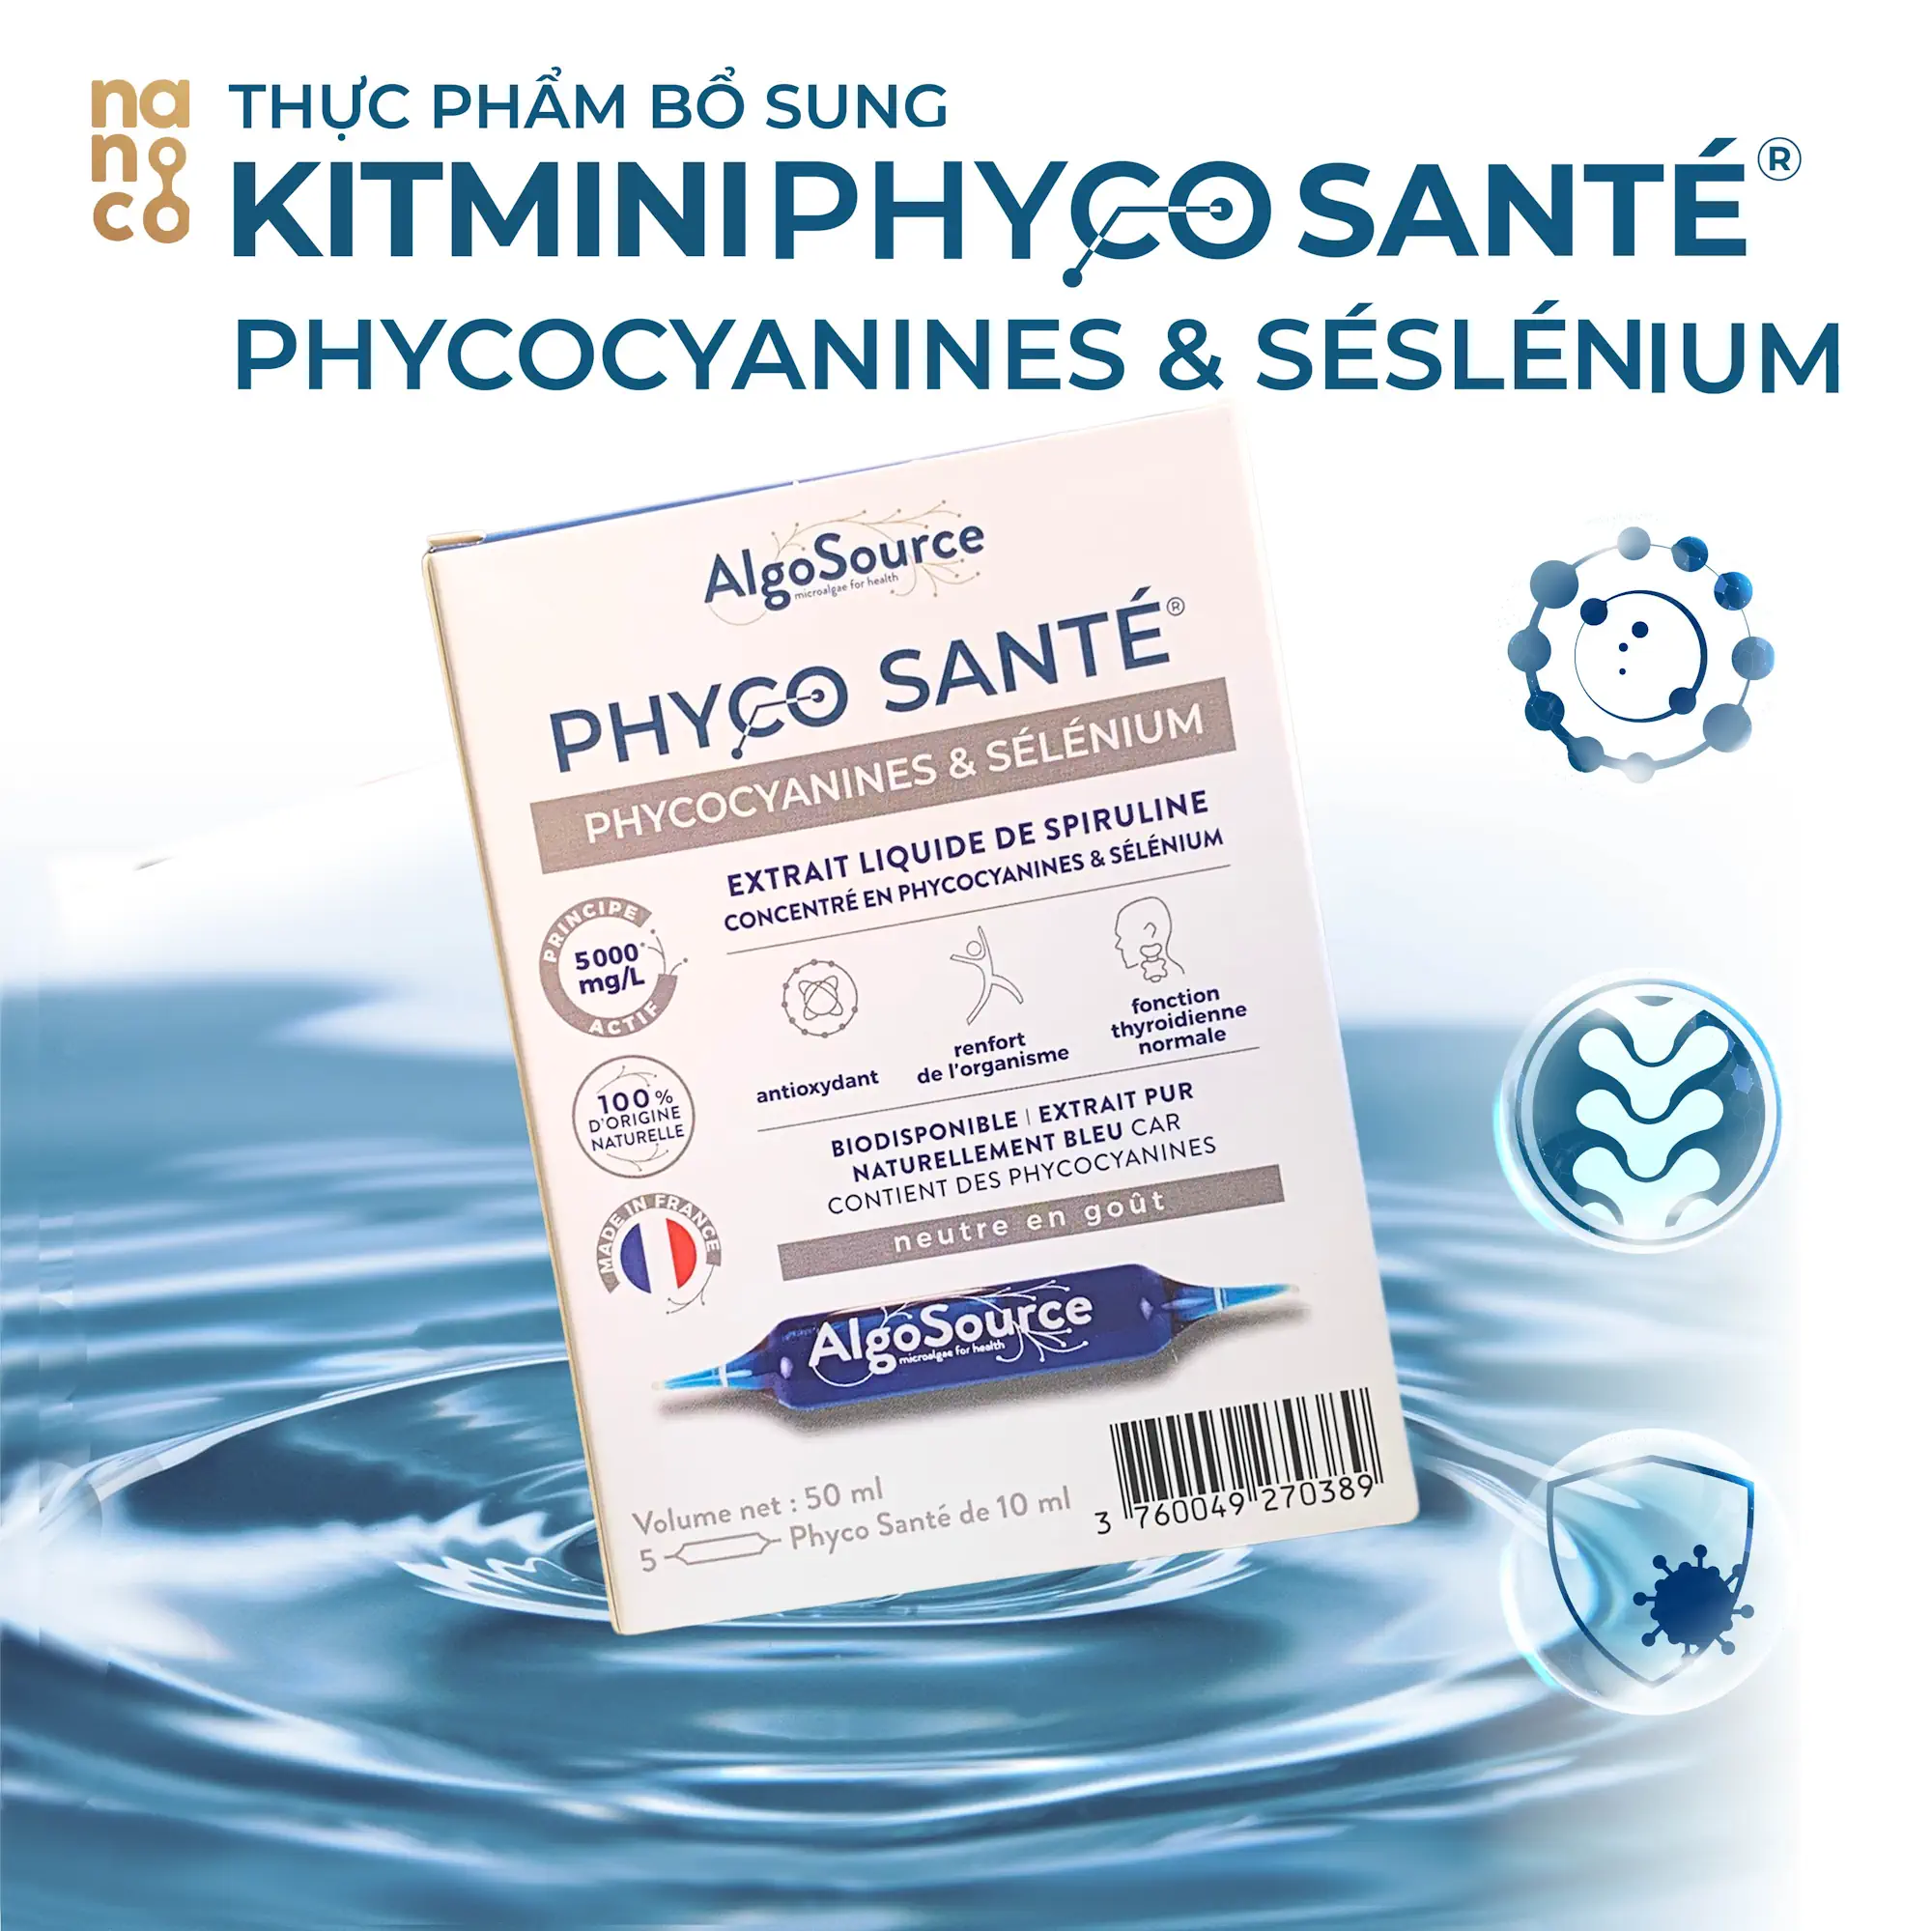 Phyco Sante - Phycocyanines & Seslenium - Droppii Mall